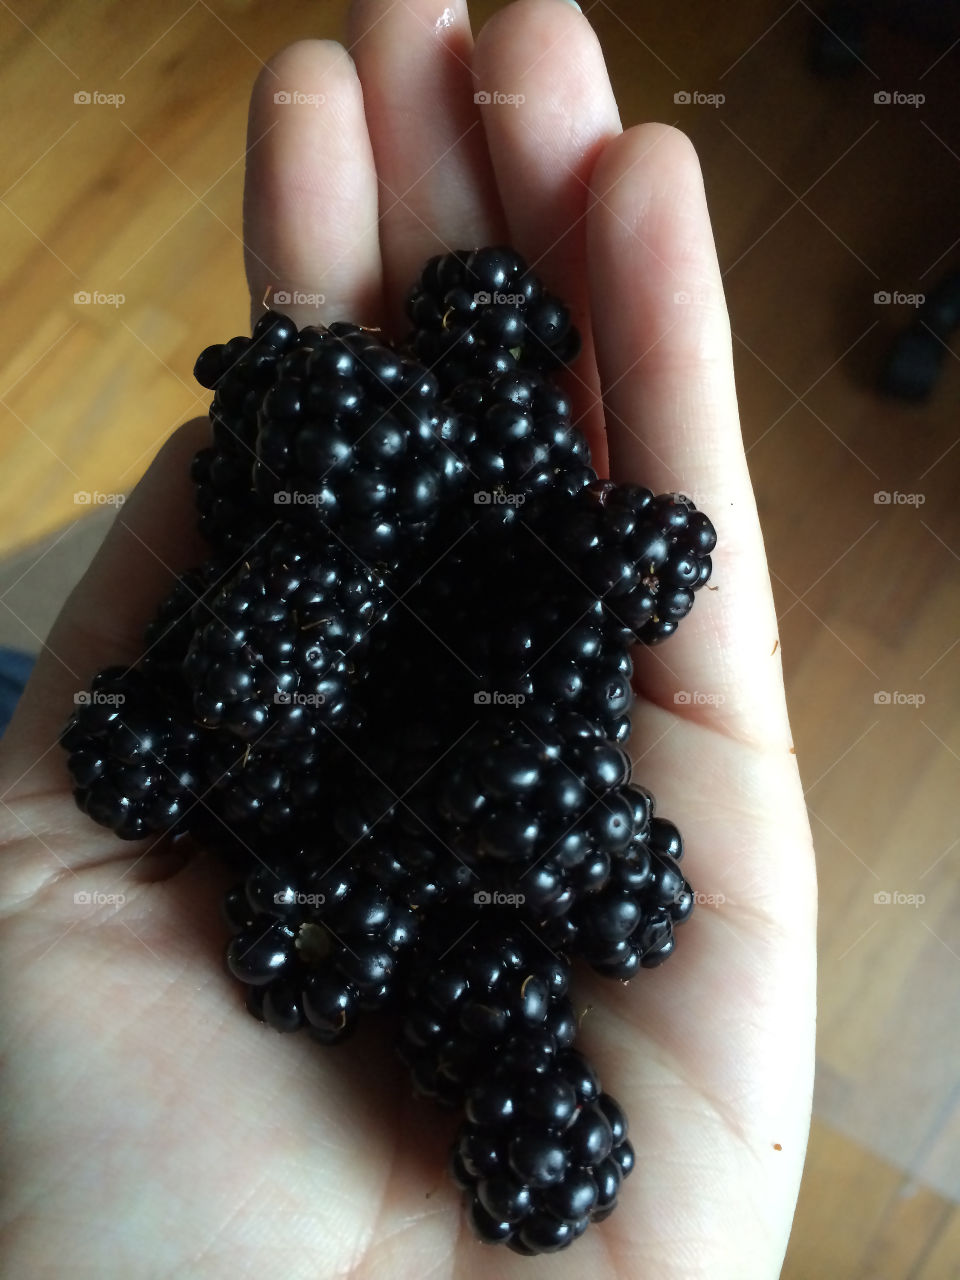 Blackberries season. I took them from a tree on the way back home, while I was living in Victoria, BC - Canada